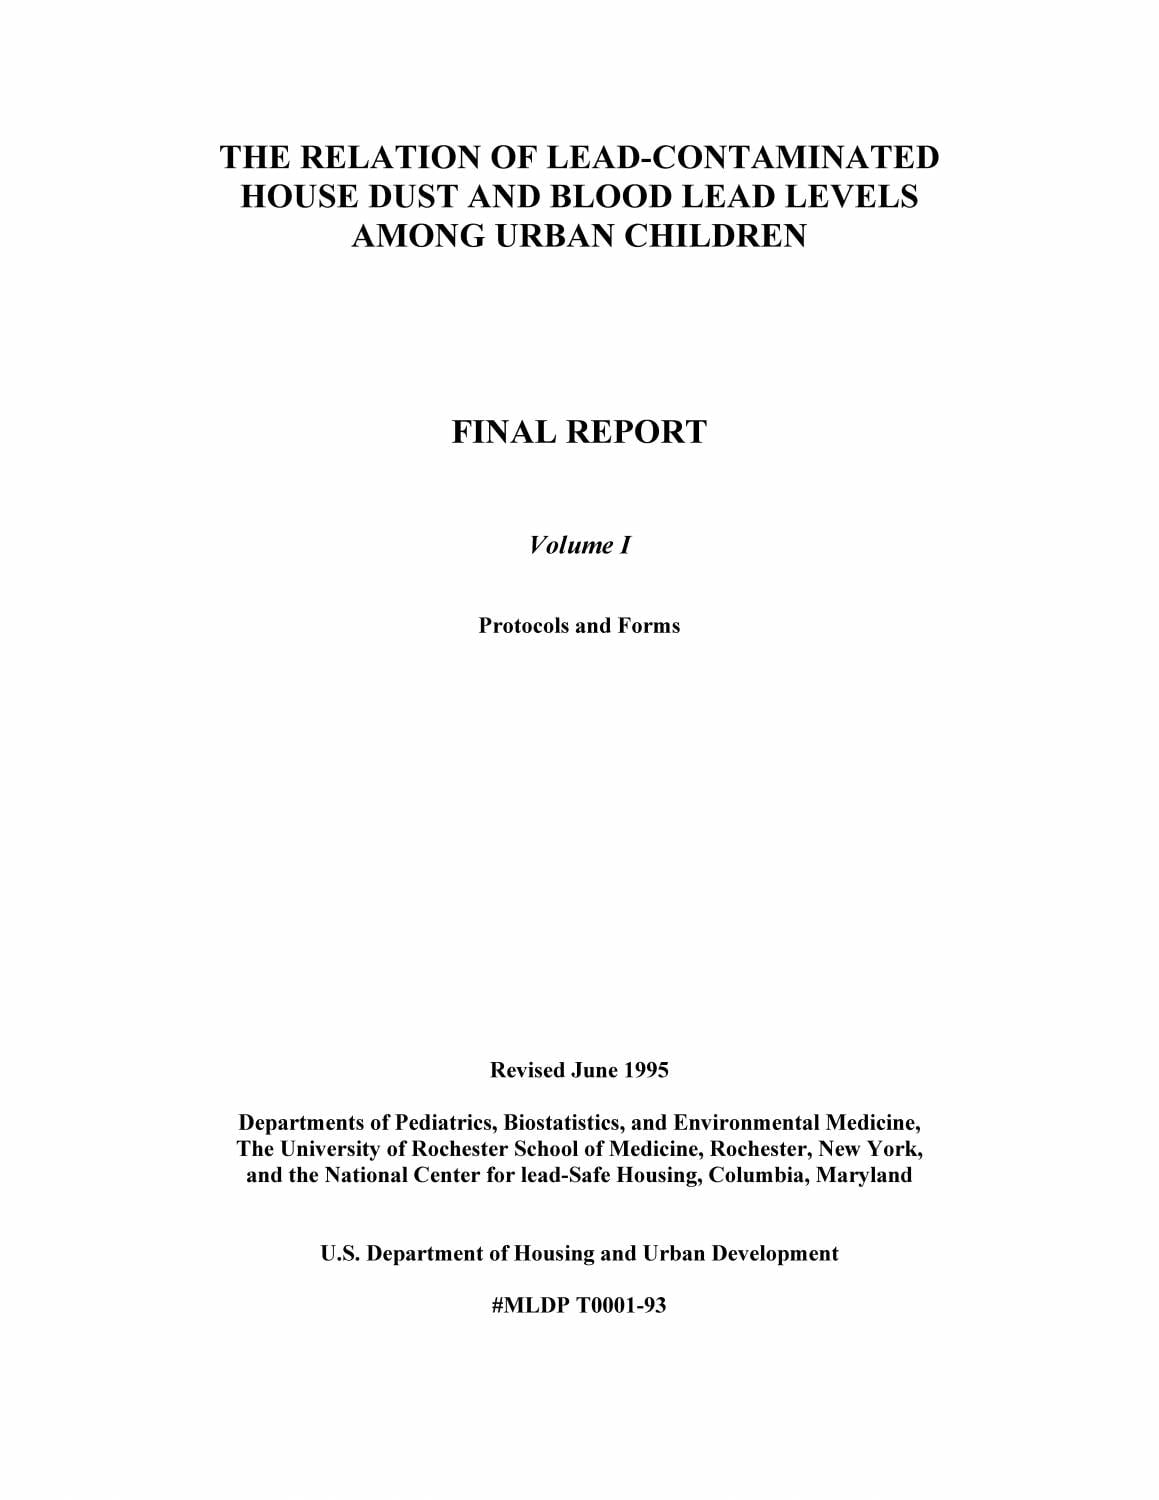 The Relation of Lead-Contaminated House Dust and Blood Lead Levels Among Urban Children: Final Report Volume 1: Protocols and Forms